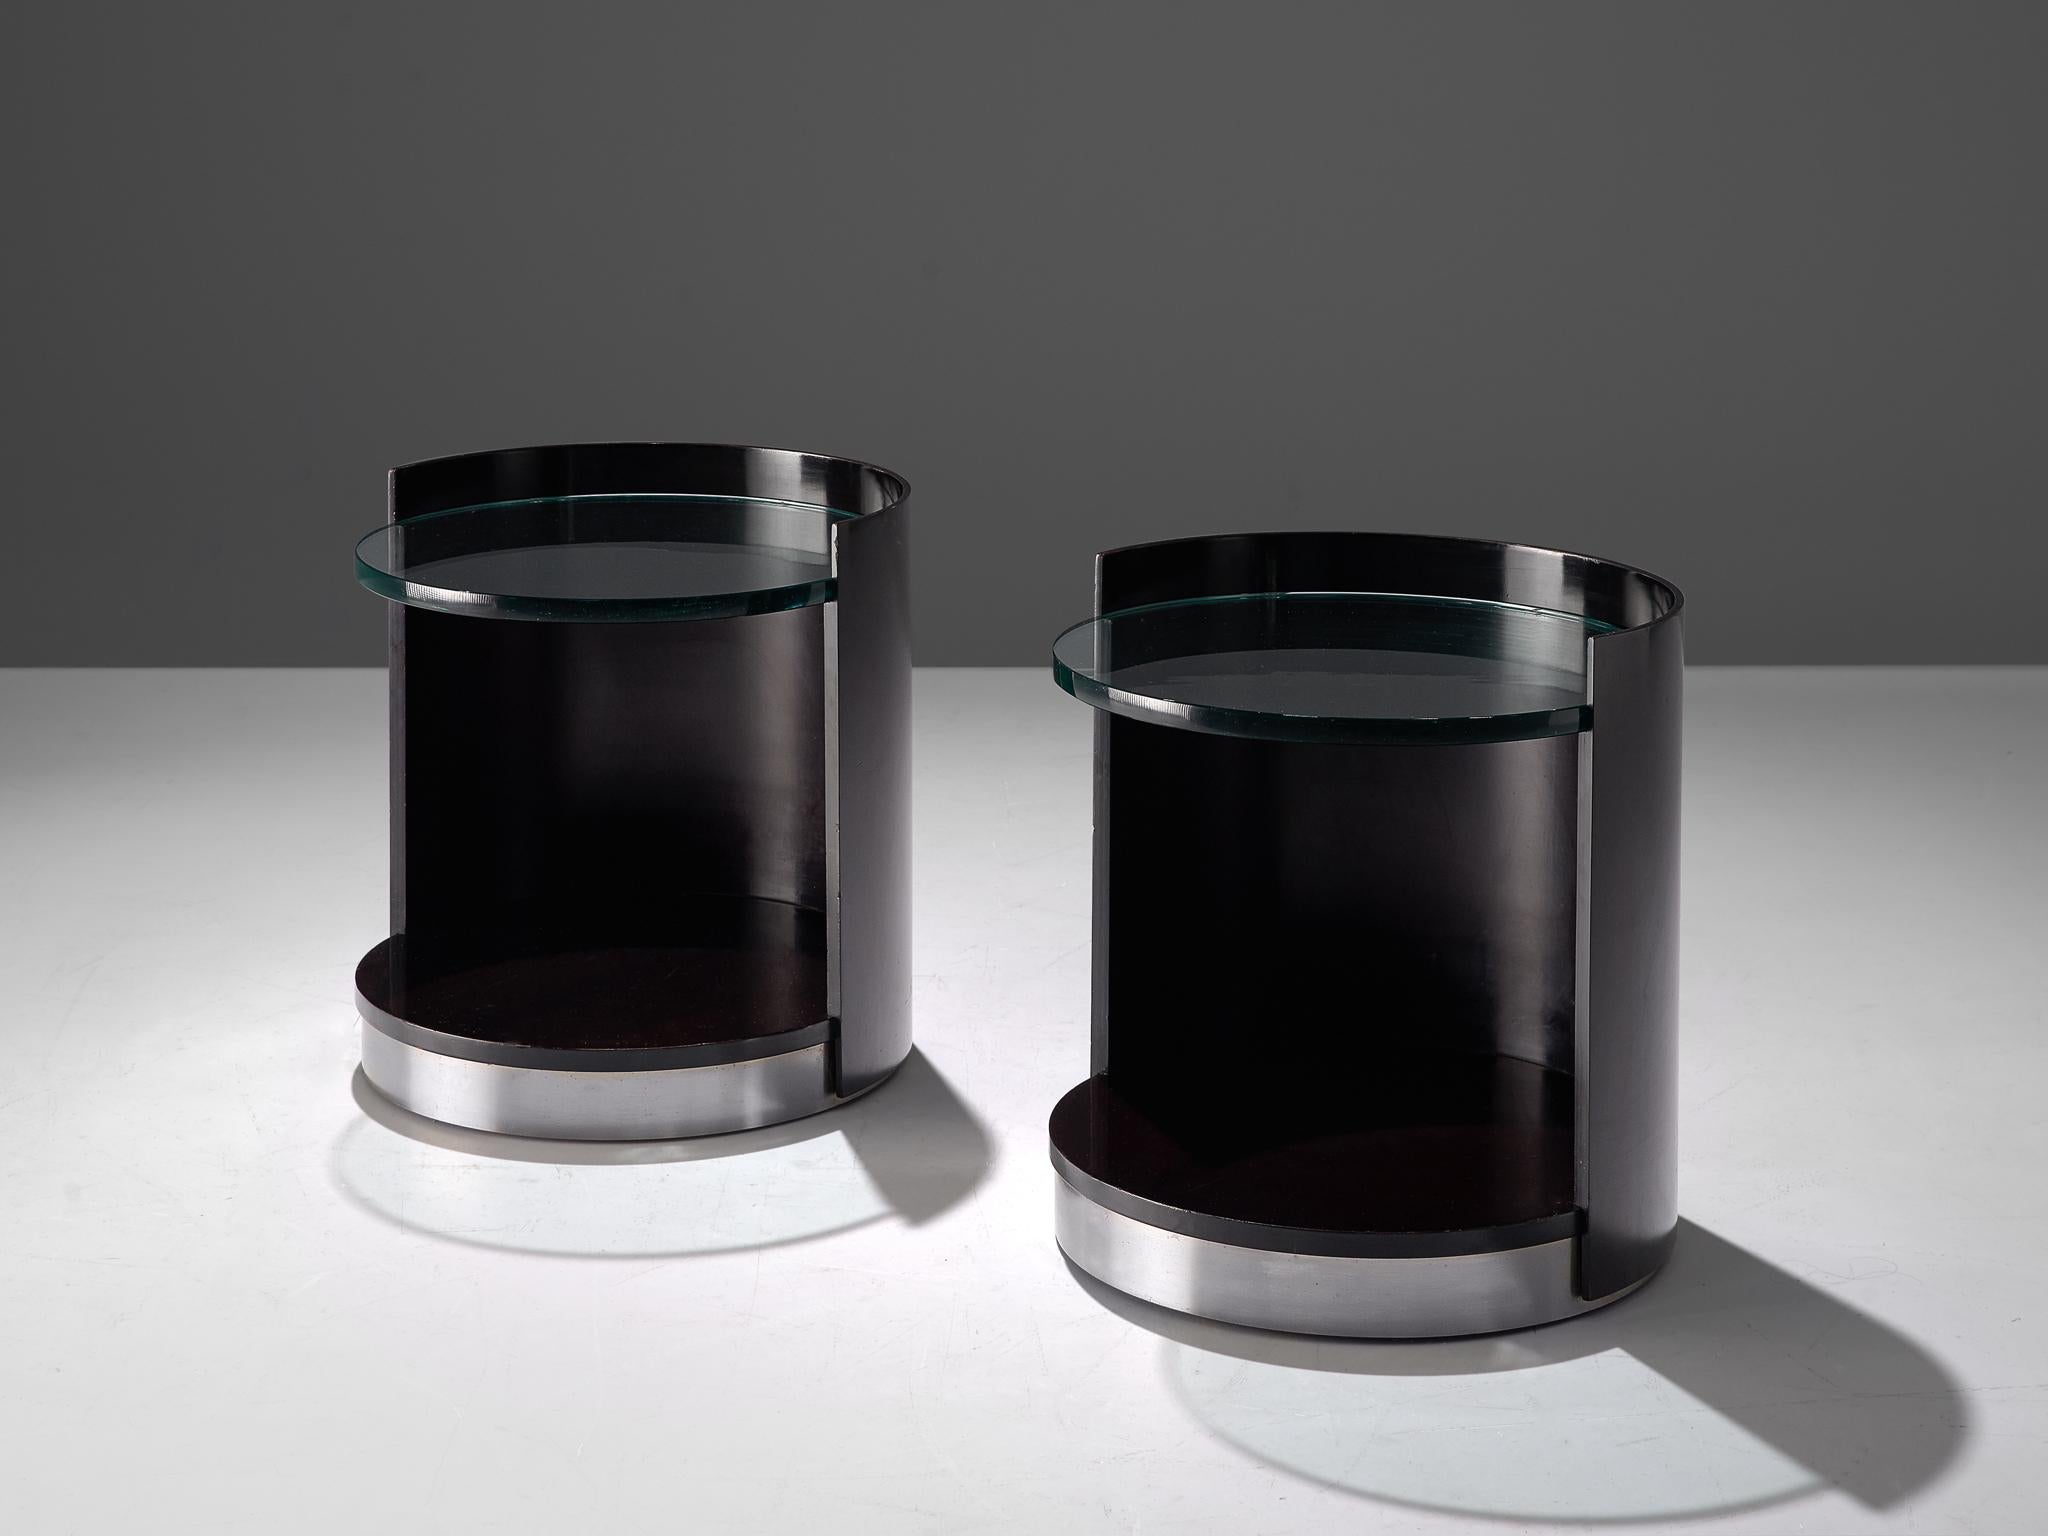 Gianni Moscatelli for Formanova, pair of side tables, wood, glass and metal, Italy, 1970s

Postmodern pair of nightstands by Gianni Moscatelli for Formanova. The tables have a cylindrical shape, featuring a black lacquered wood frame that's open